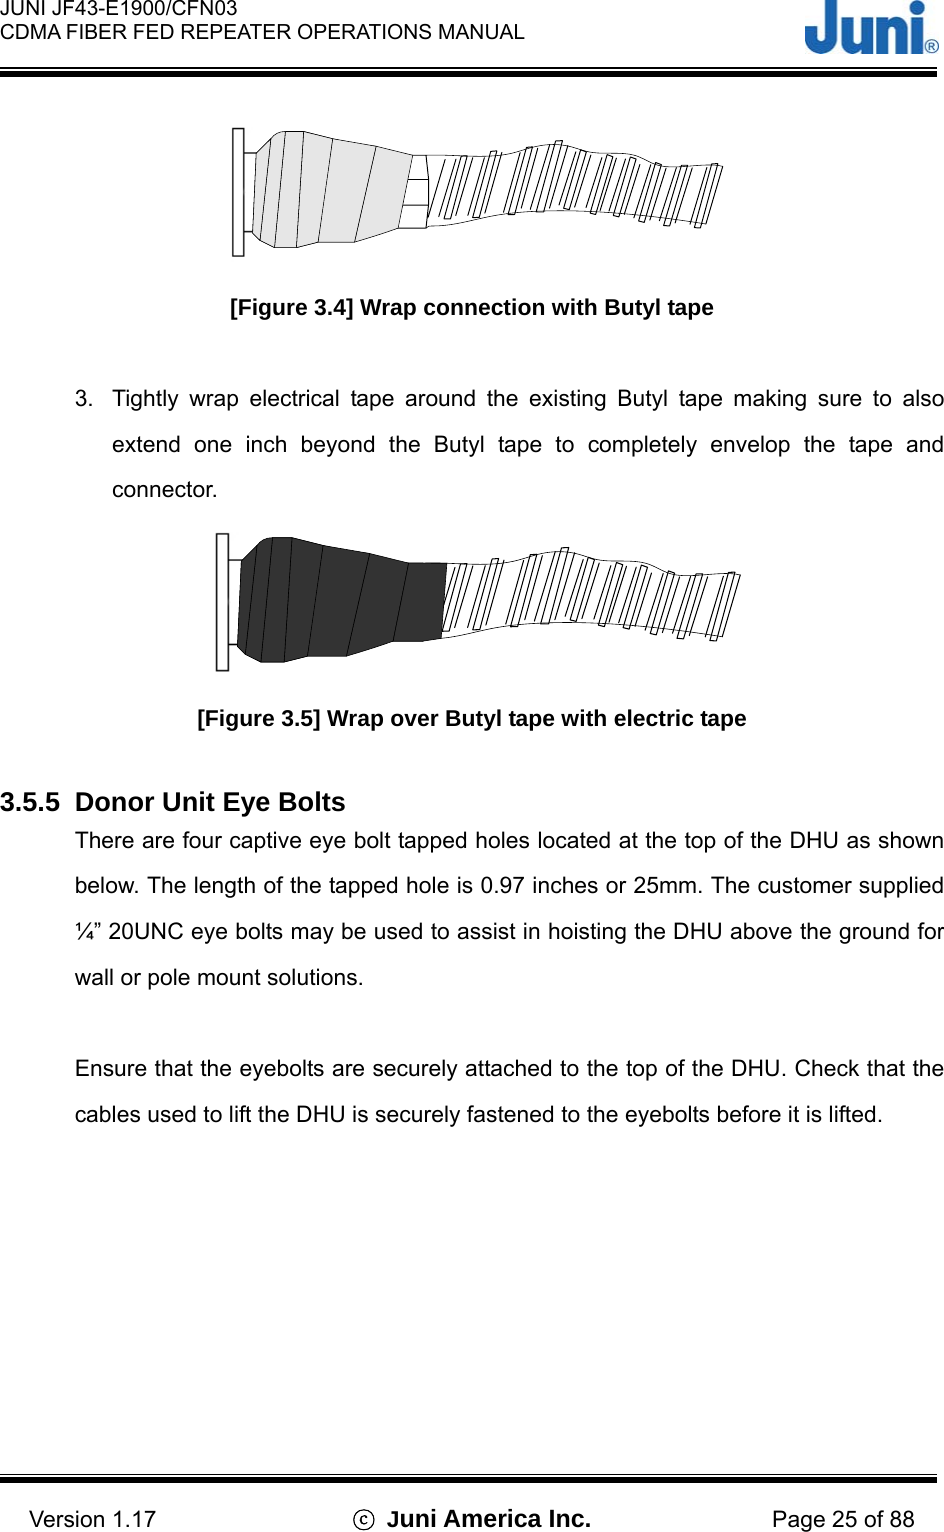  JUNI JF43-E1900/CFN03 CDMA FIBER FED REPEATER OPERATIONS MANUAL                                    Version 1.17  ⓒ Juni America Inc. Page 25 of 88  [Figure 3.4] Wrap connection with Butyl tape  3.  Tightly wrap electrical tape around the existing Butyl tape making sure to also extend one inch beyond the Butyl tape to completely envelop the tape and connector.  [Figure 3.5] Wrap over Butyl tape with electric tape  3.5.5  Donor Unit Eye Bolts There are four captive eye bolt tapped holes located at the top of the DHU as shown below. The length of the tapped hole is 0.97 inches or 25mm. The customer supplied ¼” 20UNC eye bolts may be used to assist in hoisting the DHU above the ground for wall or pole mount solutions.  Ensure that the eyebolts are securely attached to the top of the DHU. Check that the cables used to lift the DHU is securely fastened to the eyebolts before it is lifted.   